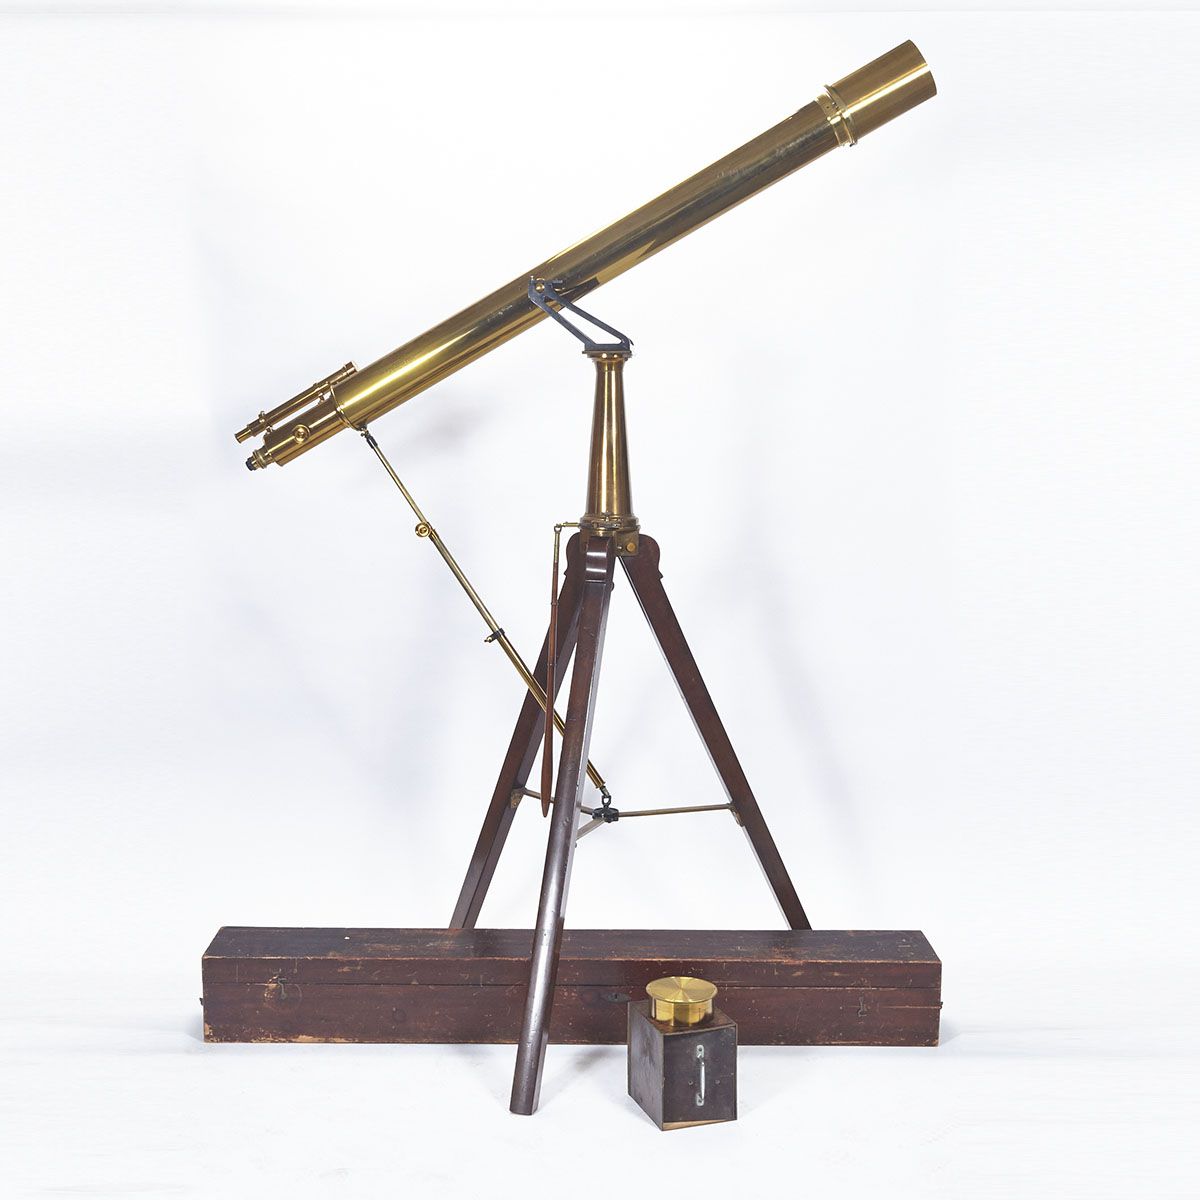 Large and Impressive Five Inch ‘Century’ Model Astronomical Refracting Telescope, W. Watson & Sons, London, late 19th/early 20th century